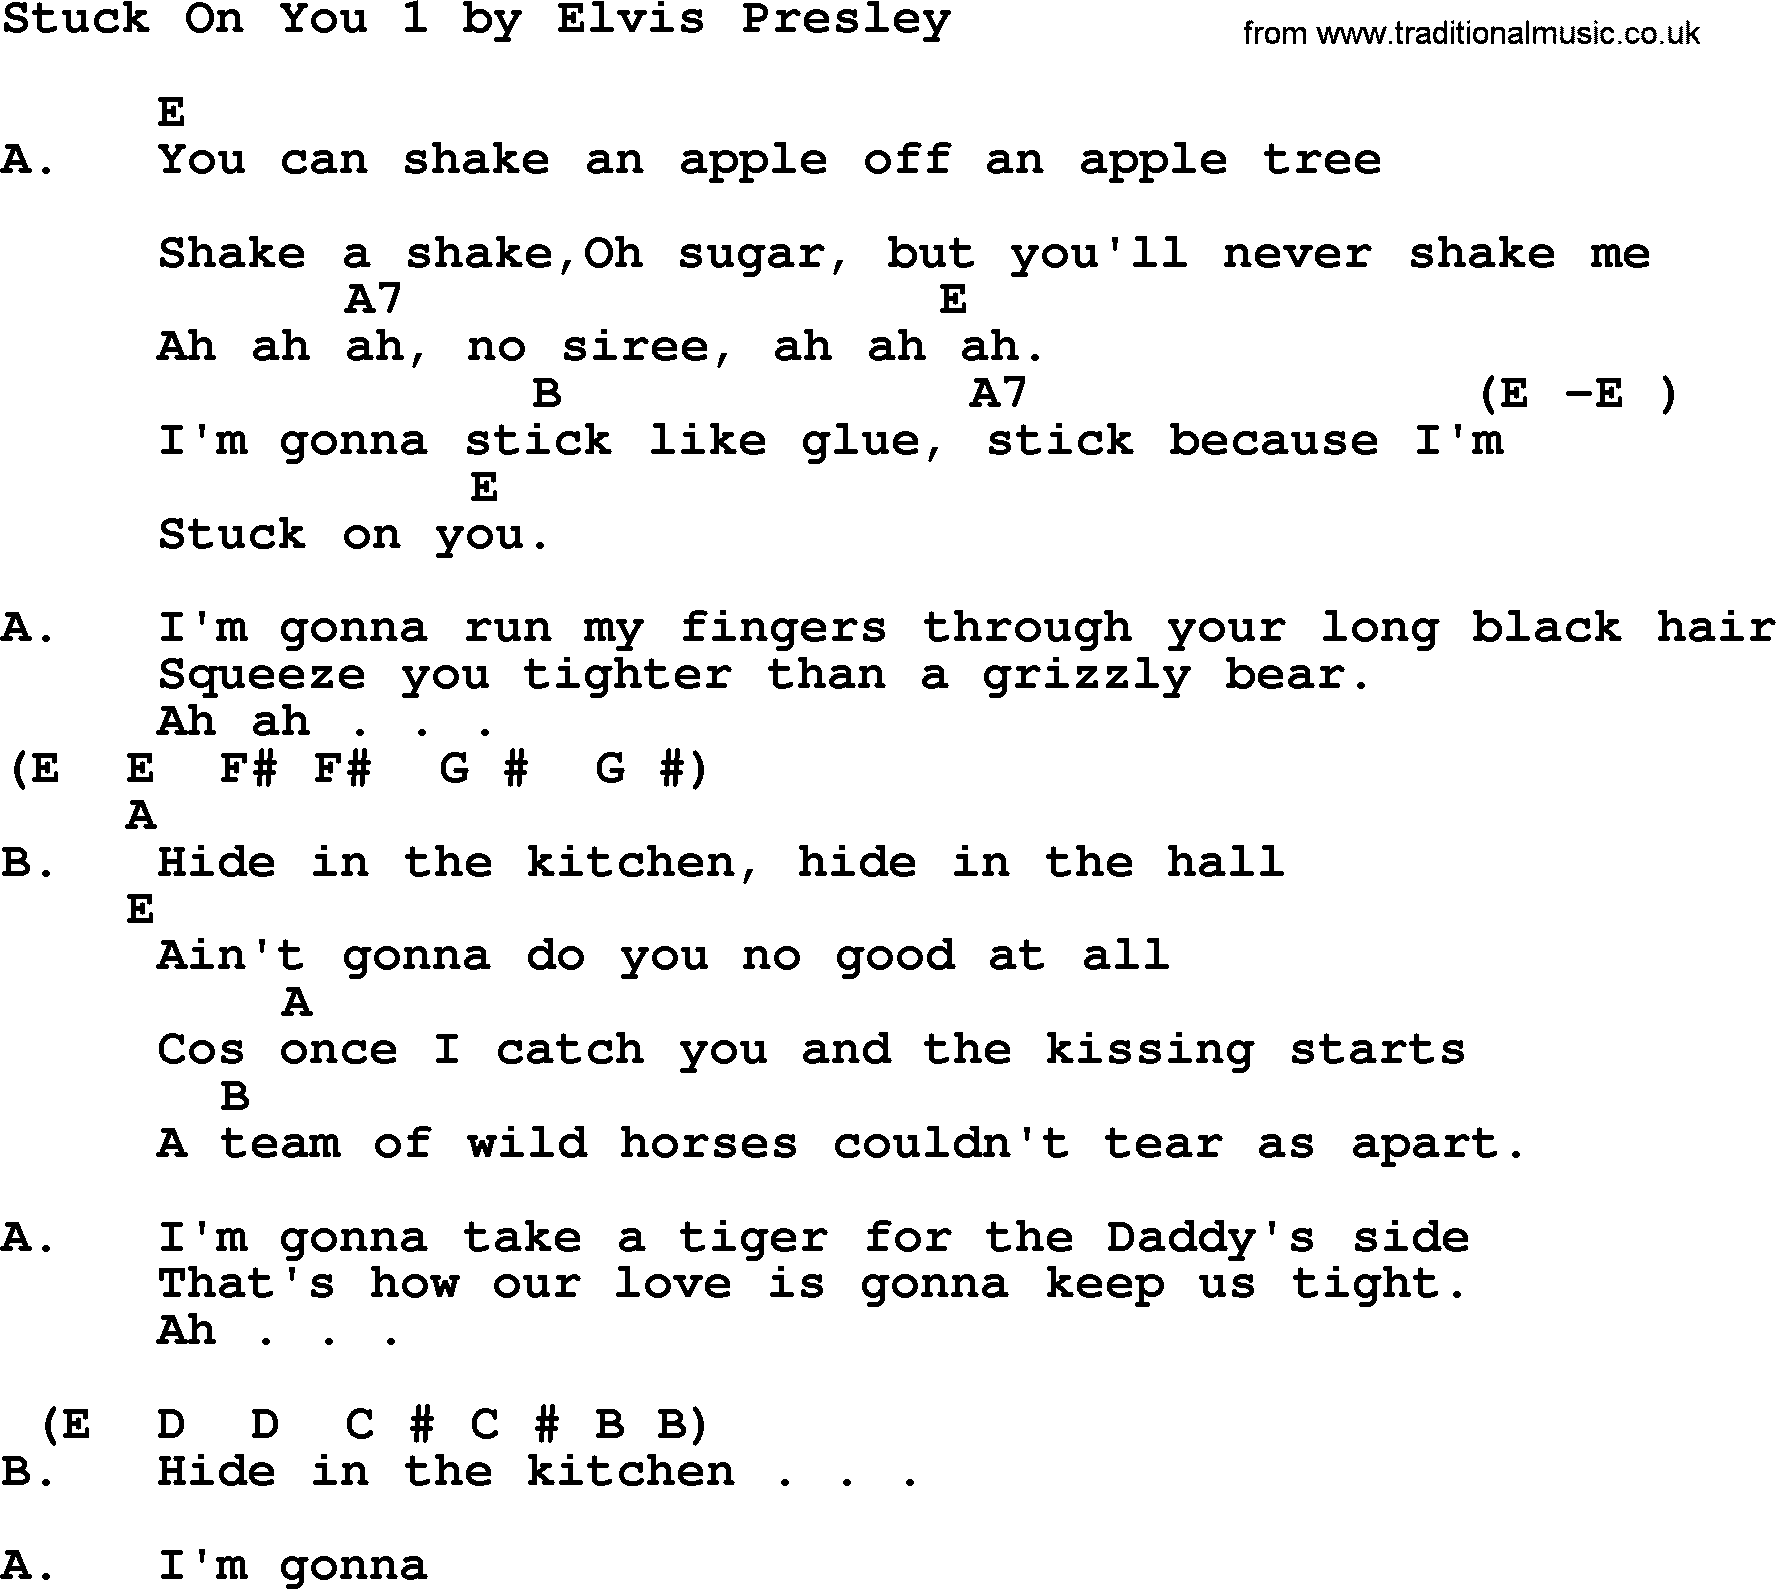 Elvis Presley song: Stuck On You 1, lyrics and chords